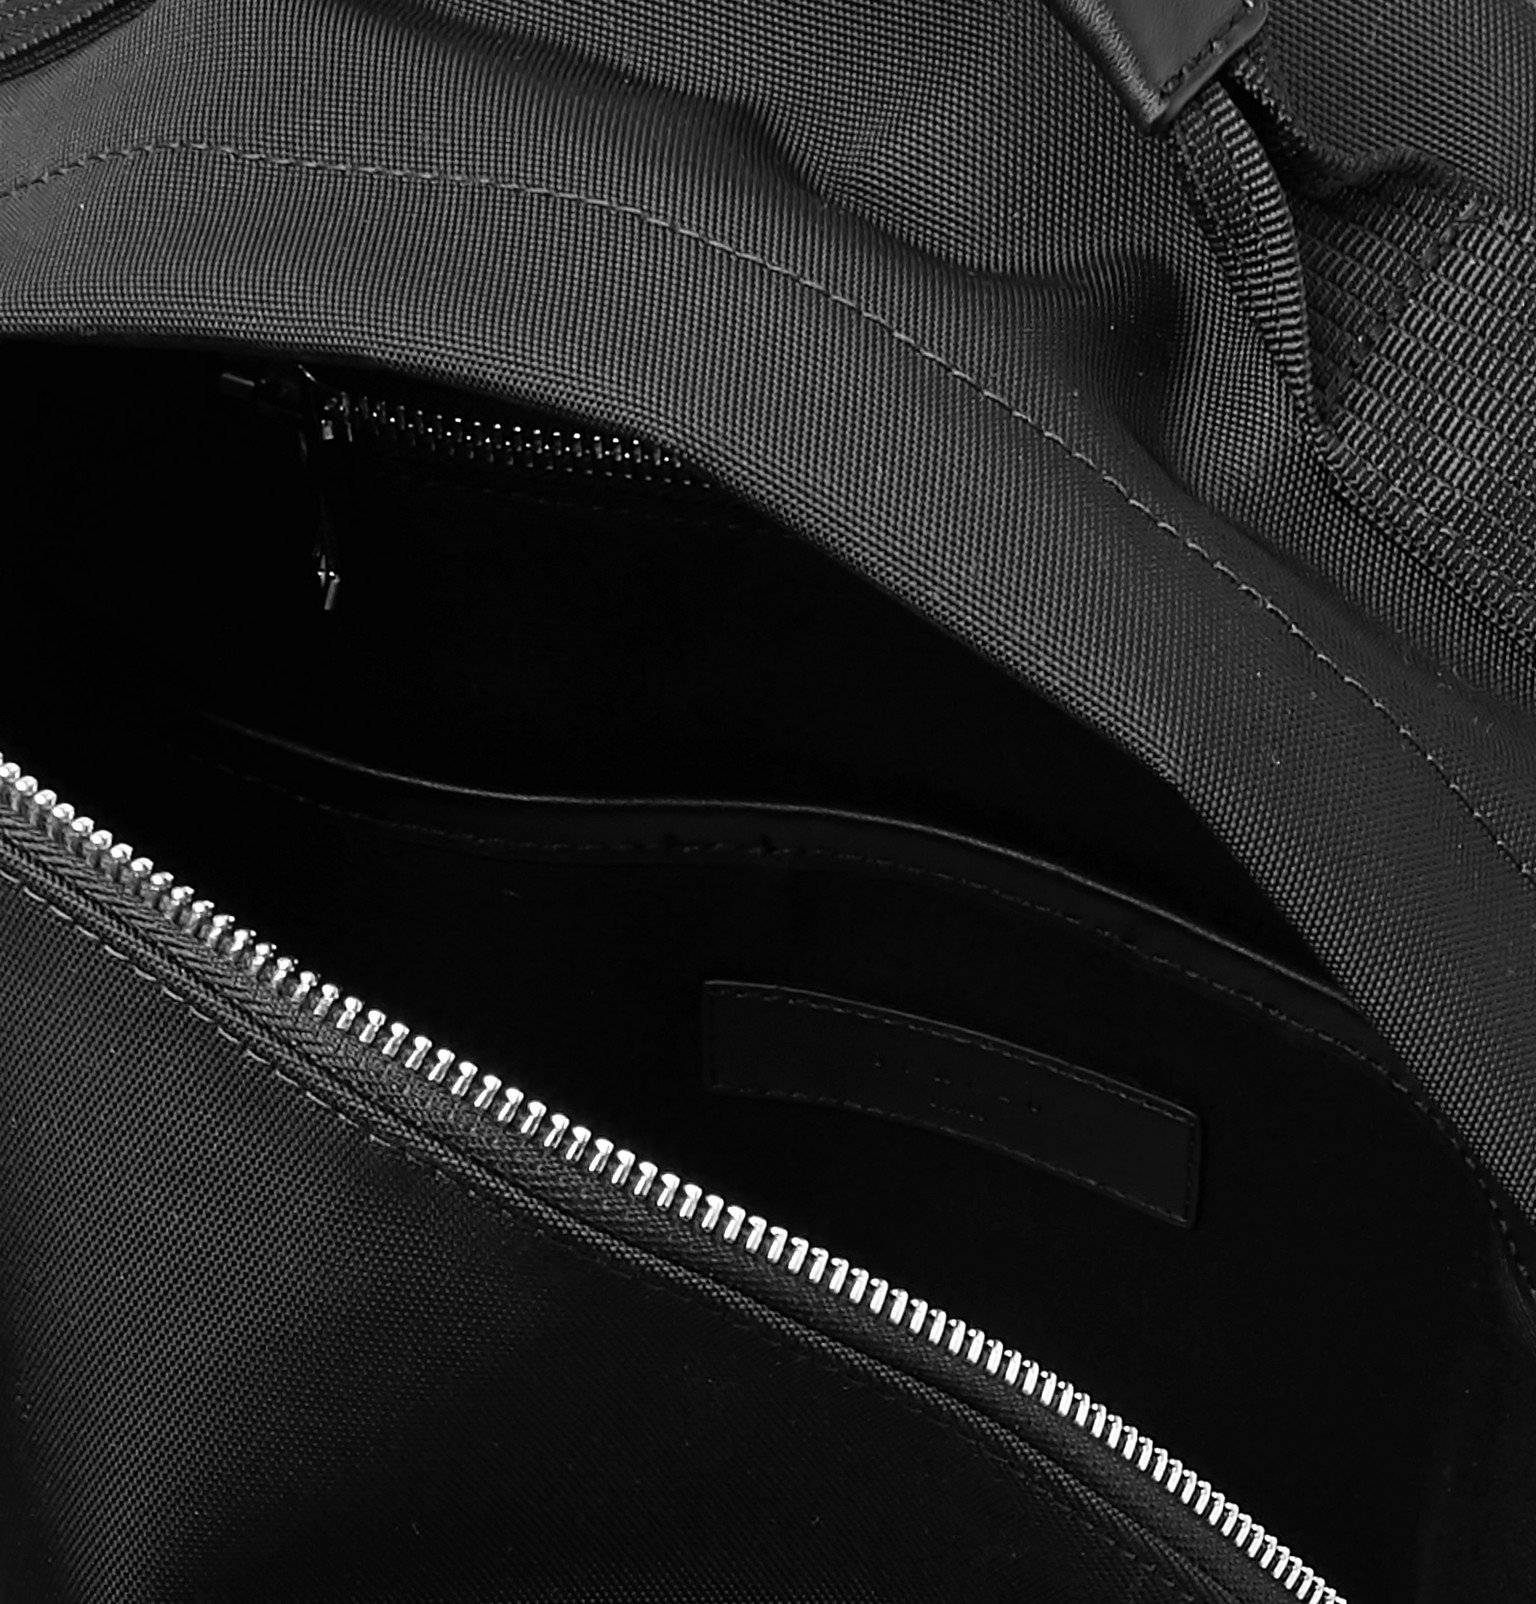 Sandro - Leather-Trimmed Canvas Backpack - Black Sandro